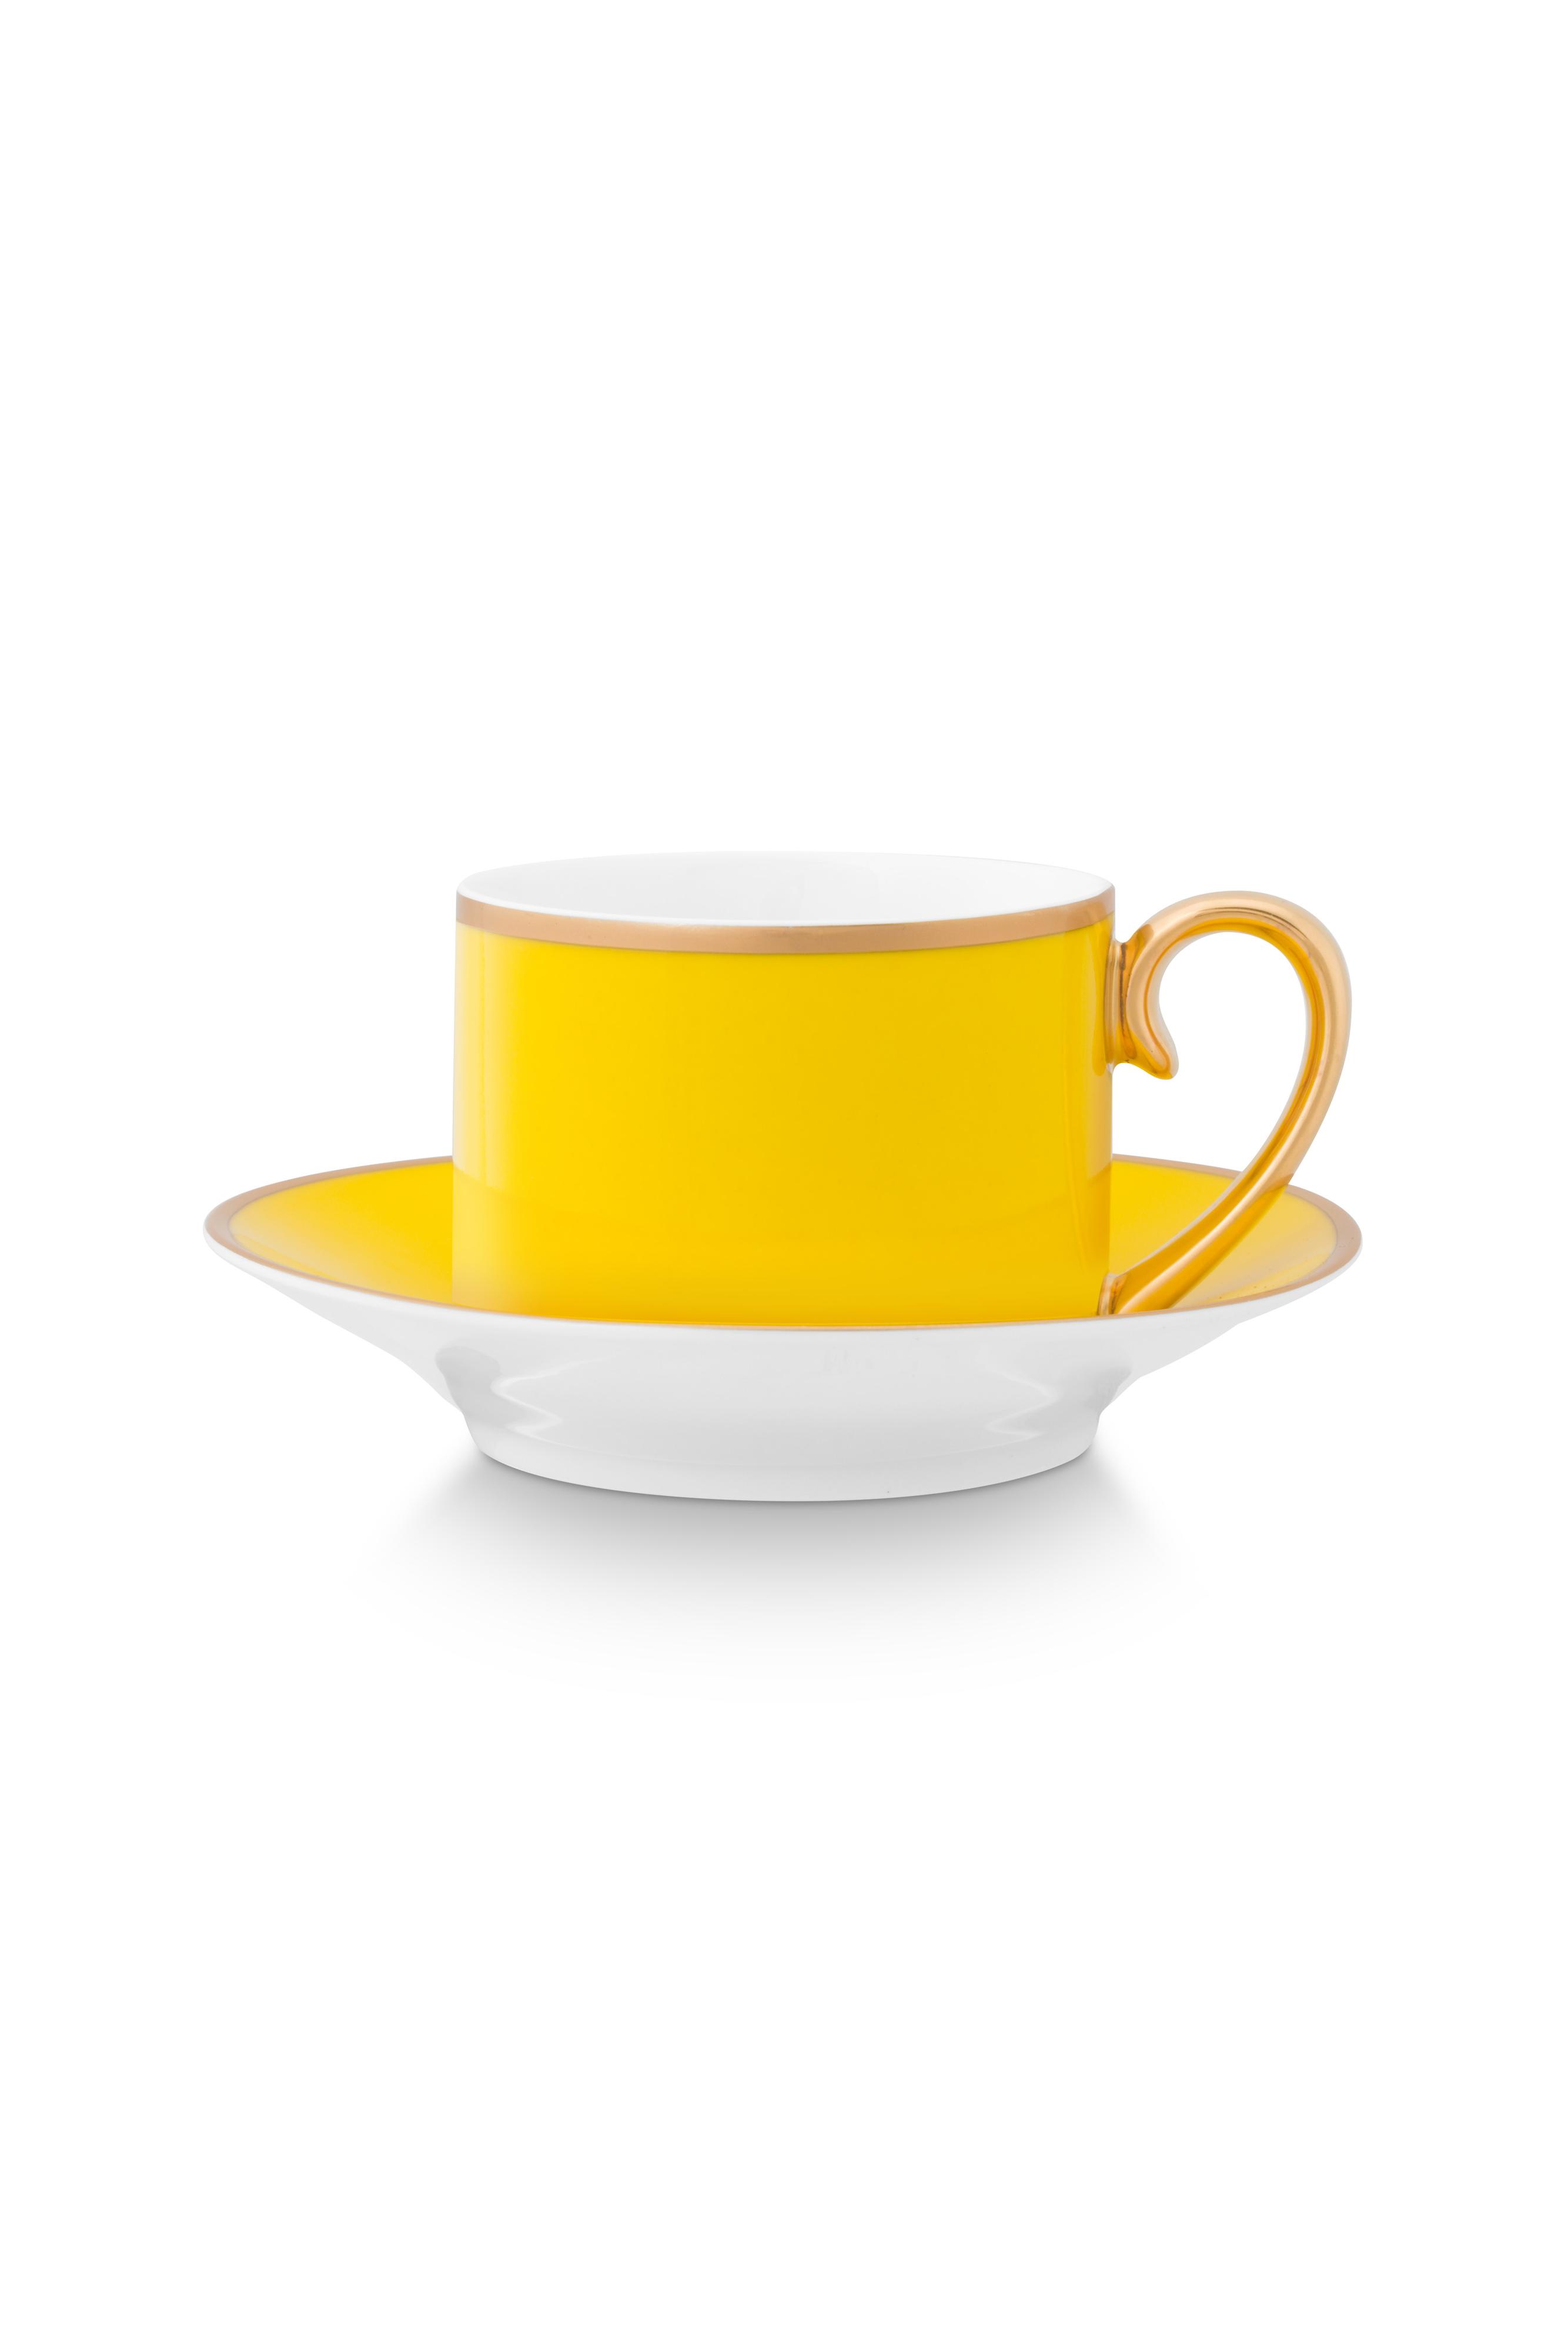 Espresso Cup - Saucer Pip Chique Gold-yellow 120ml Gift